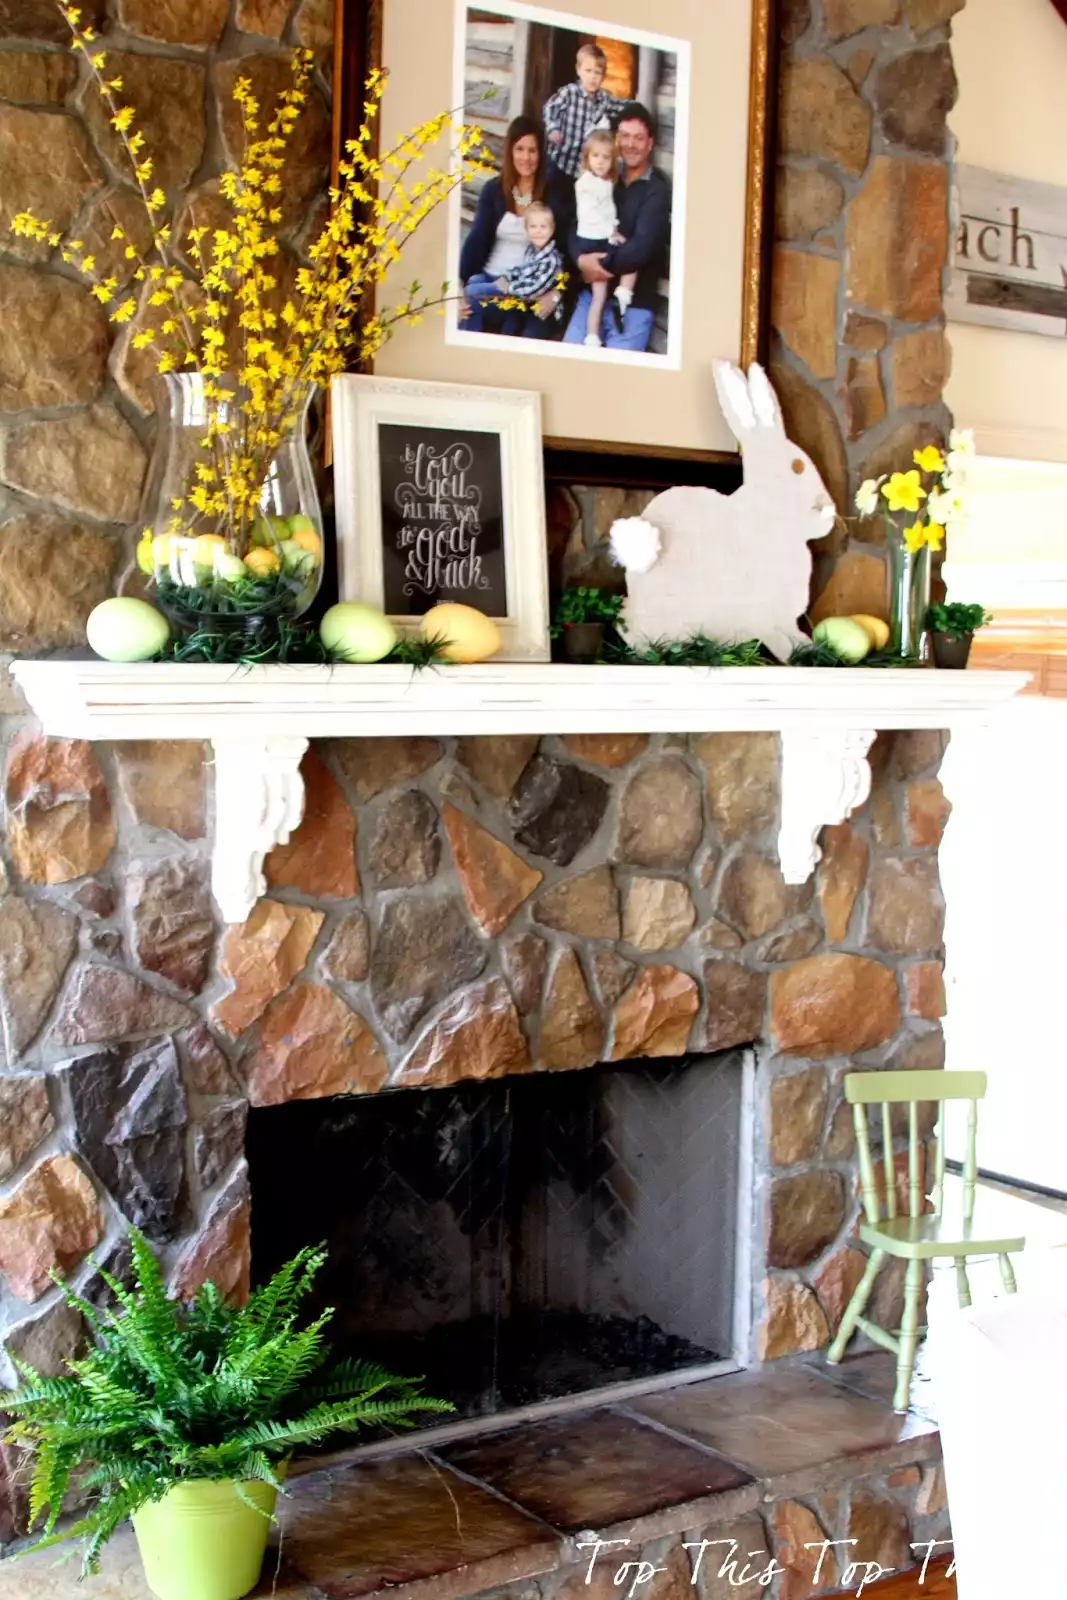 How Many Items Should Be on a Mantel?